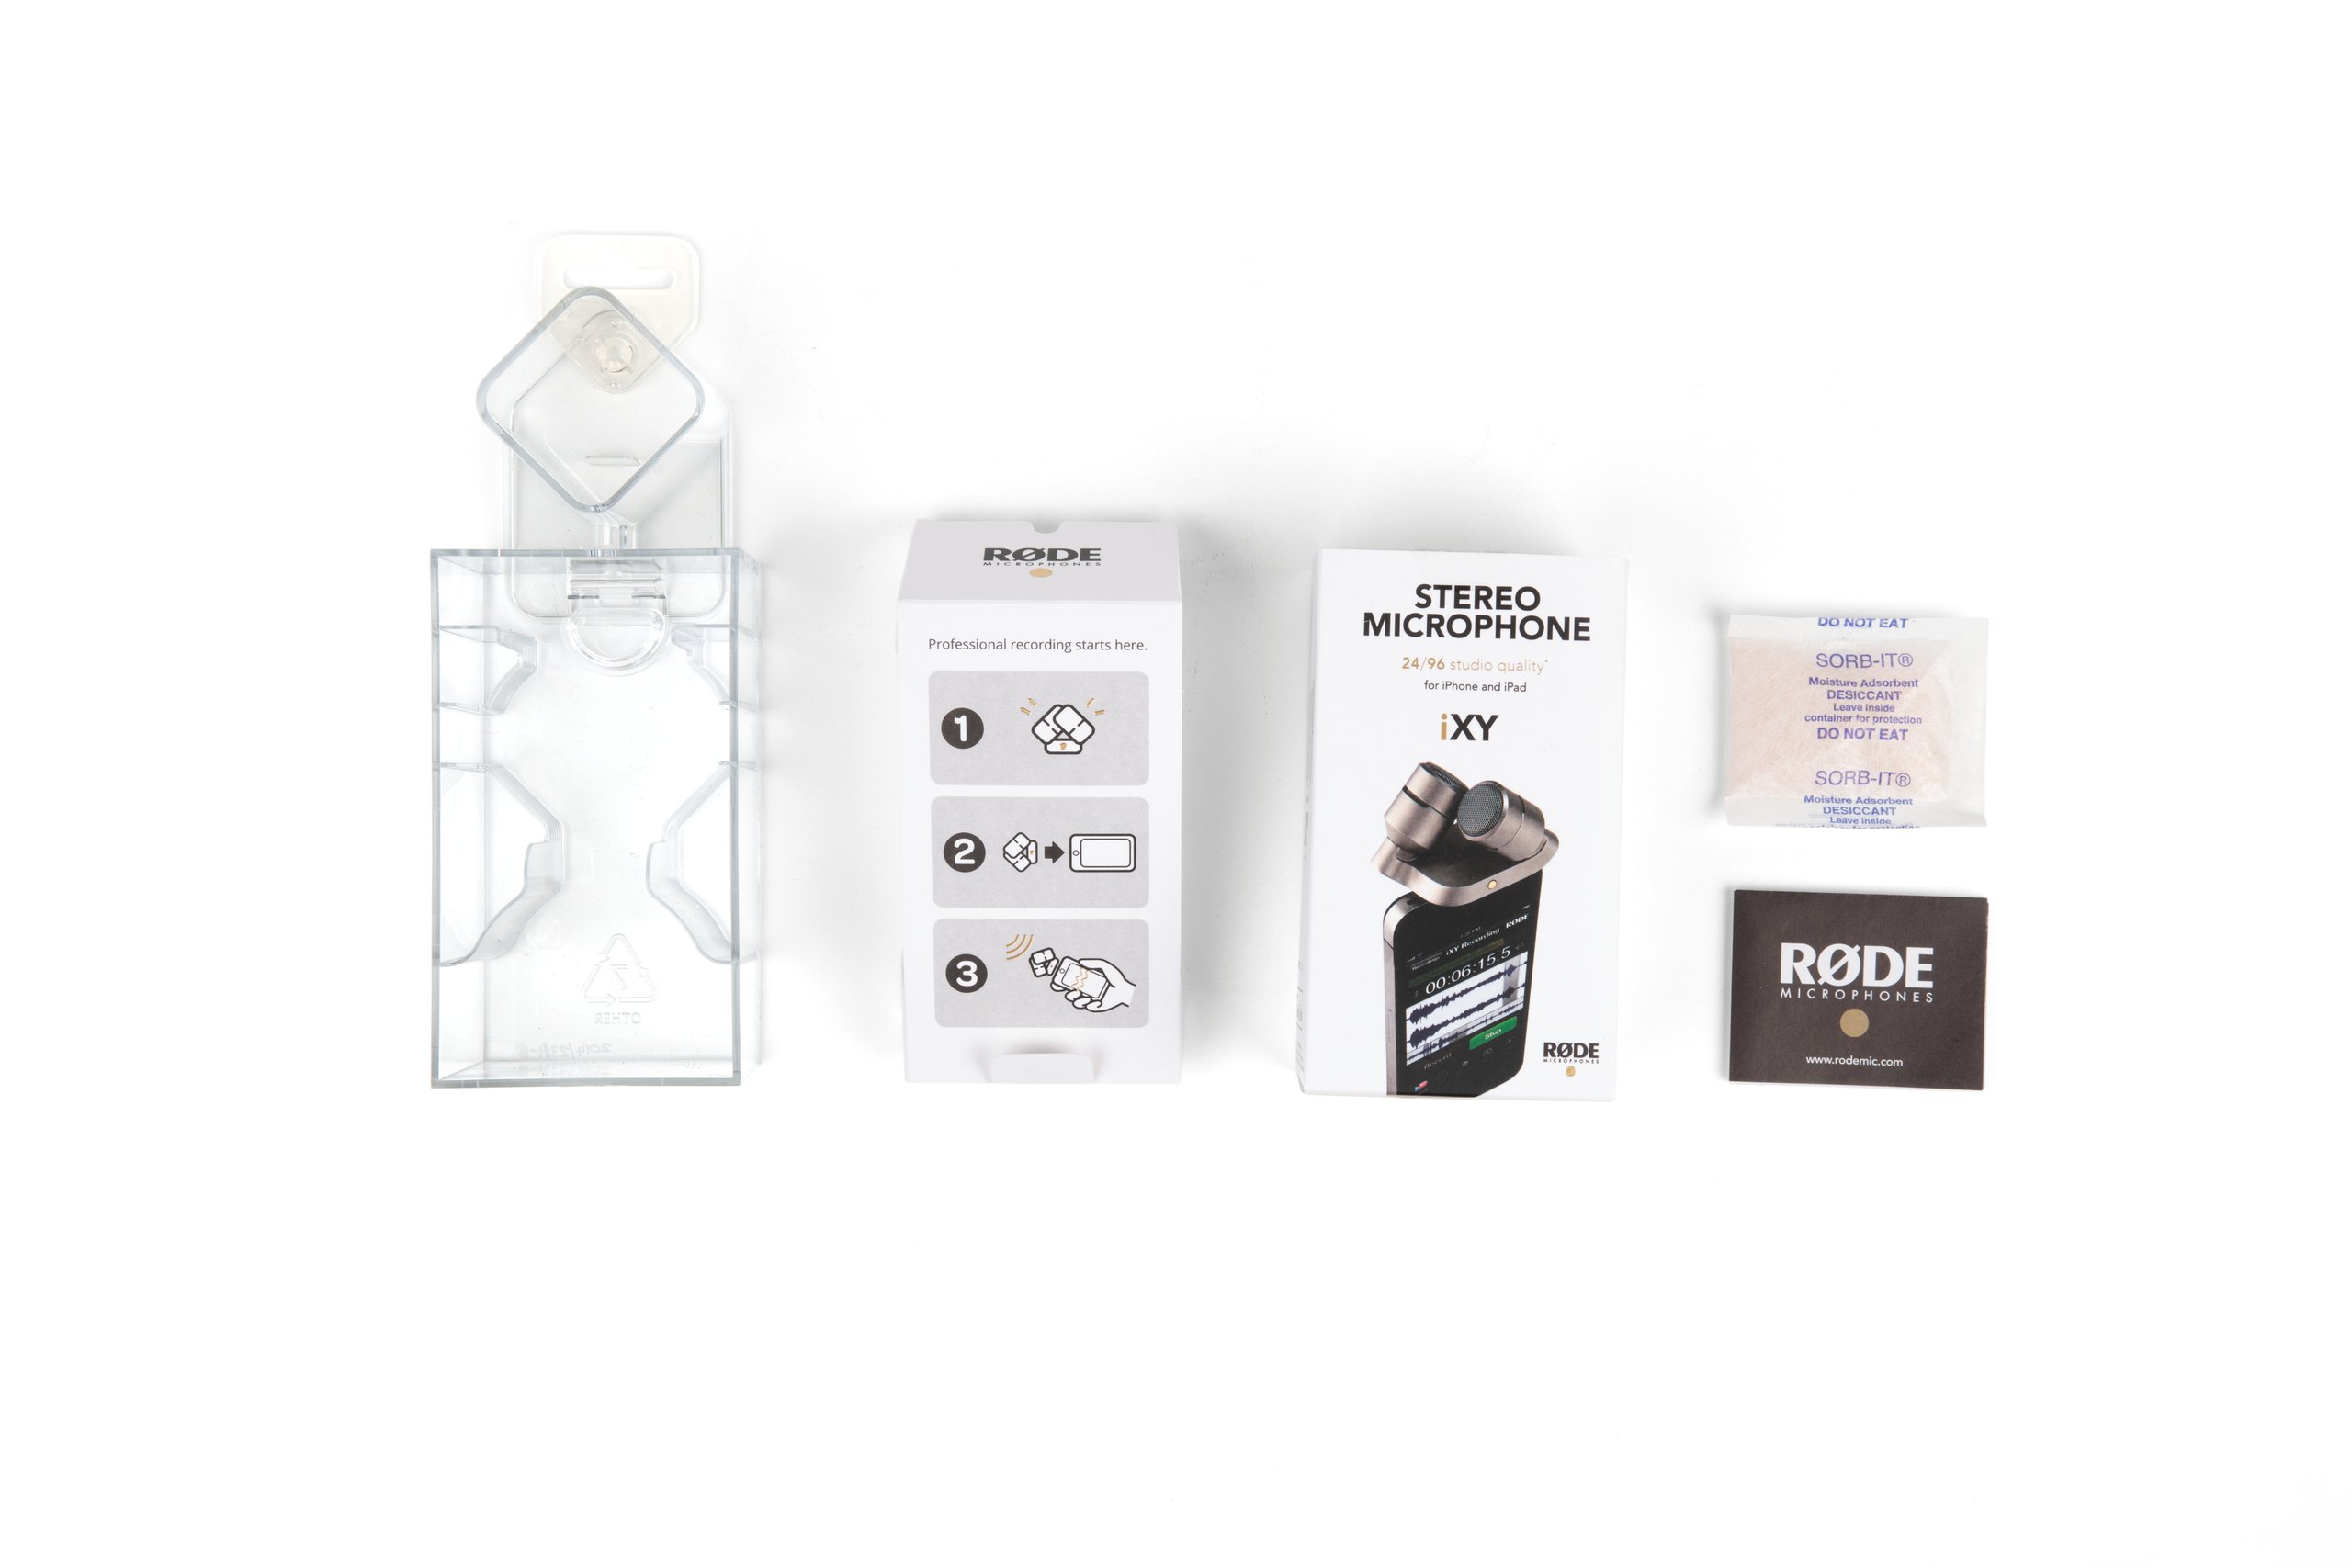 RØDE iXY directional microphone and packaging